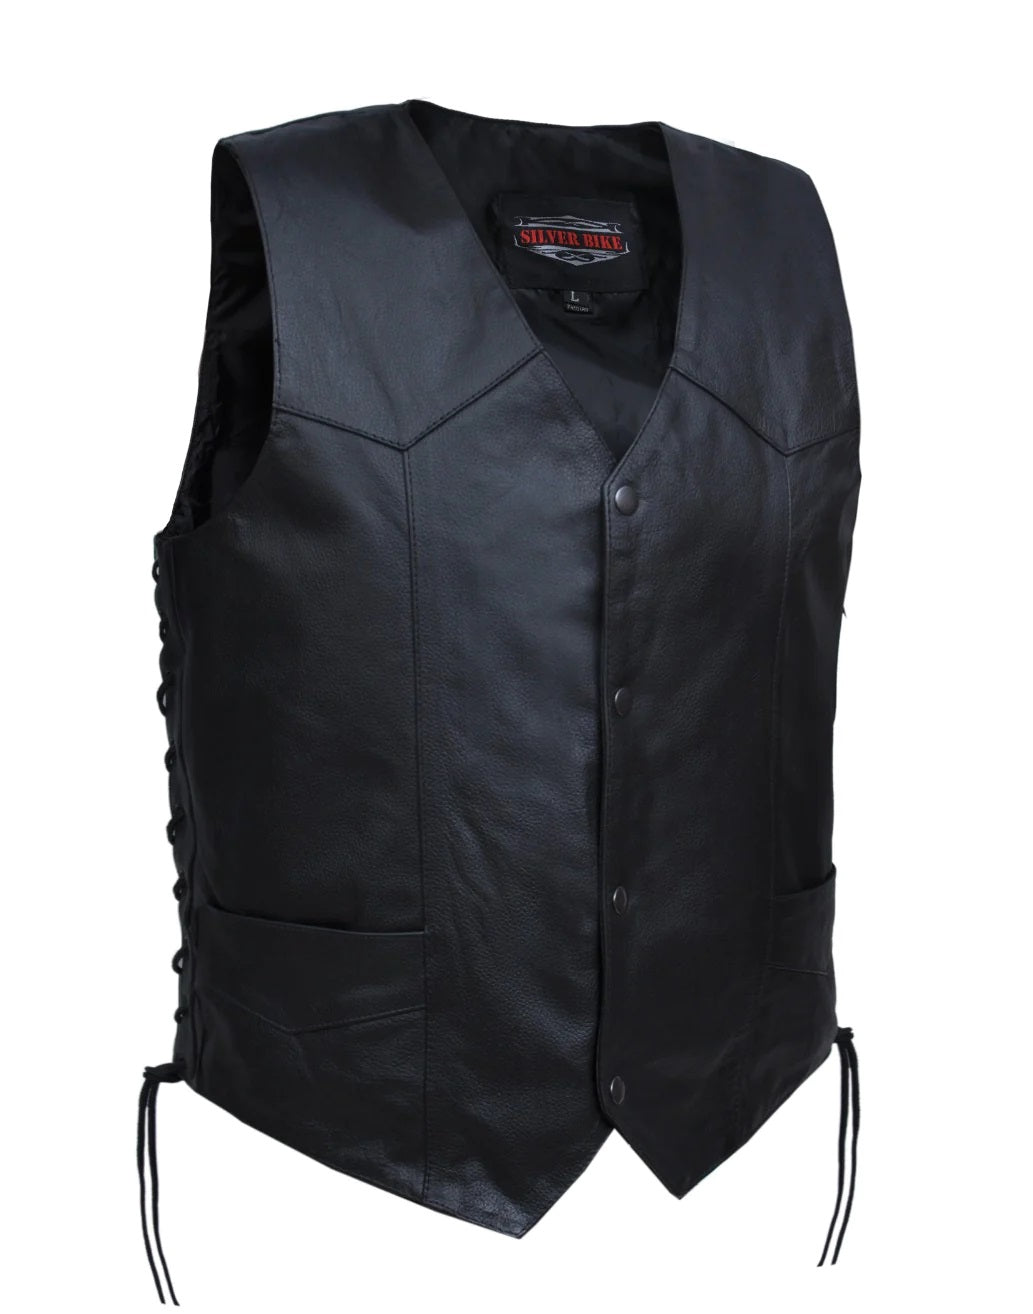 Toro Insulated Canvas Vest Saddle / Charcoal / 2XL